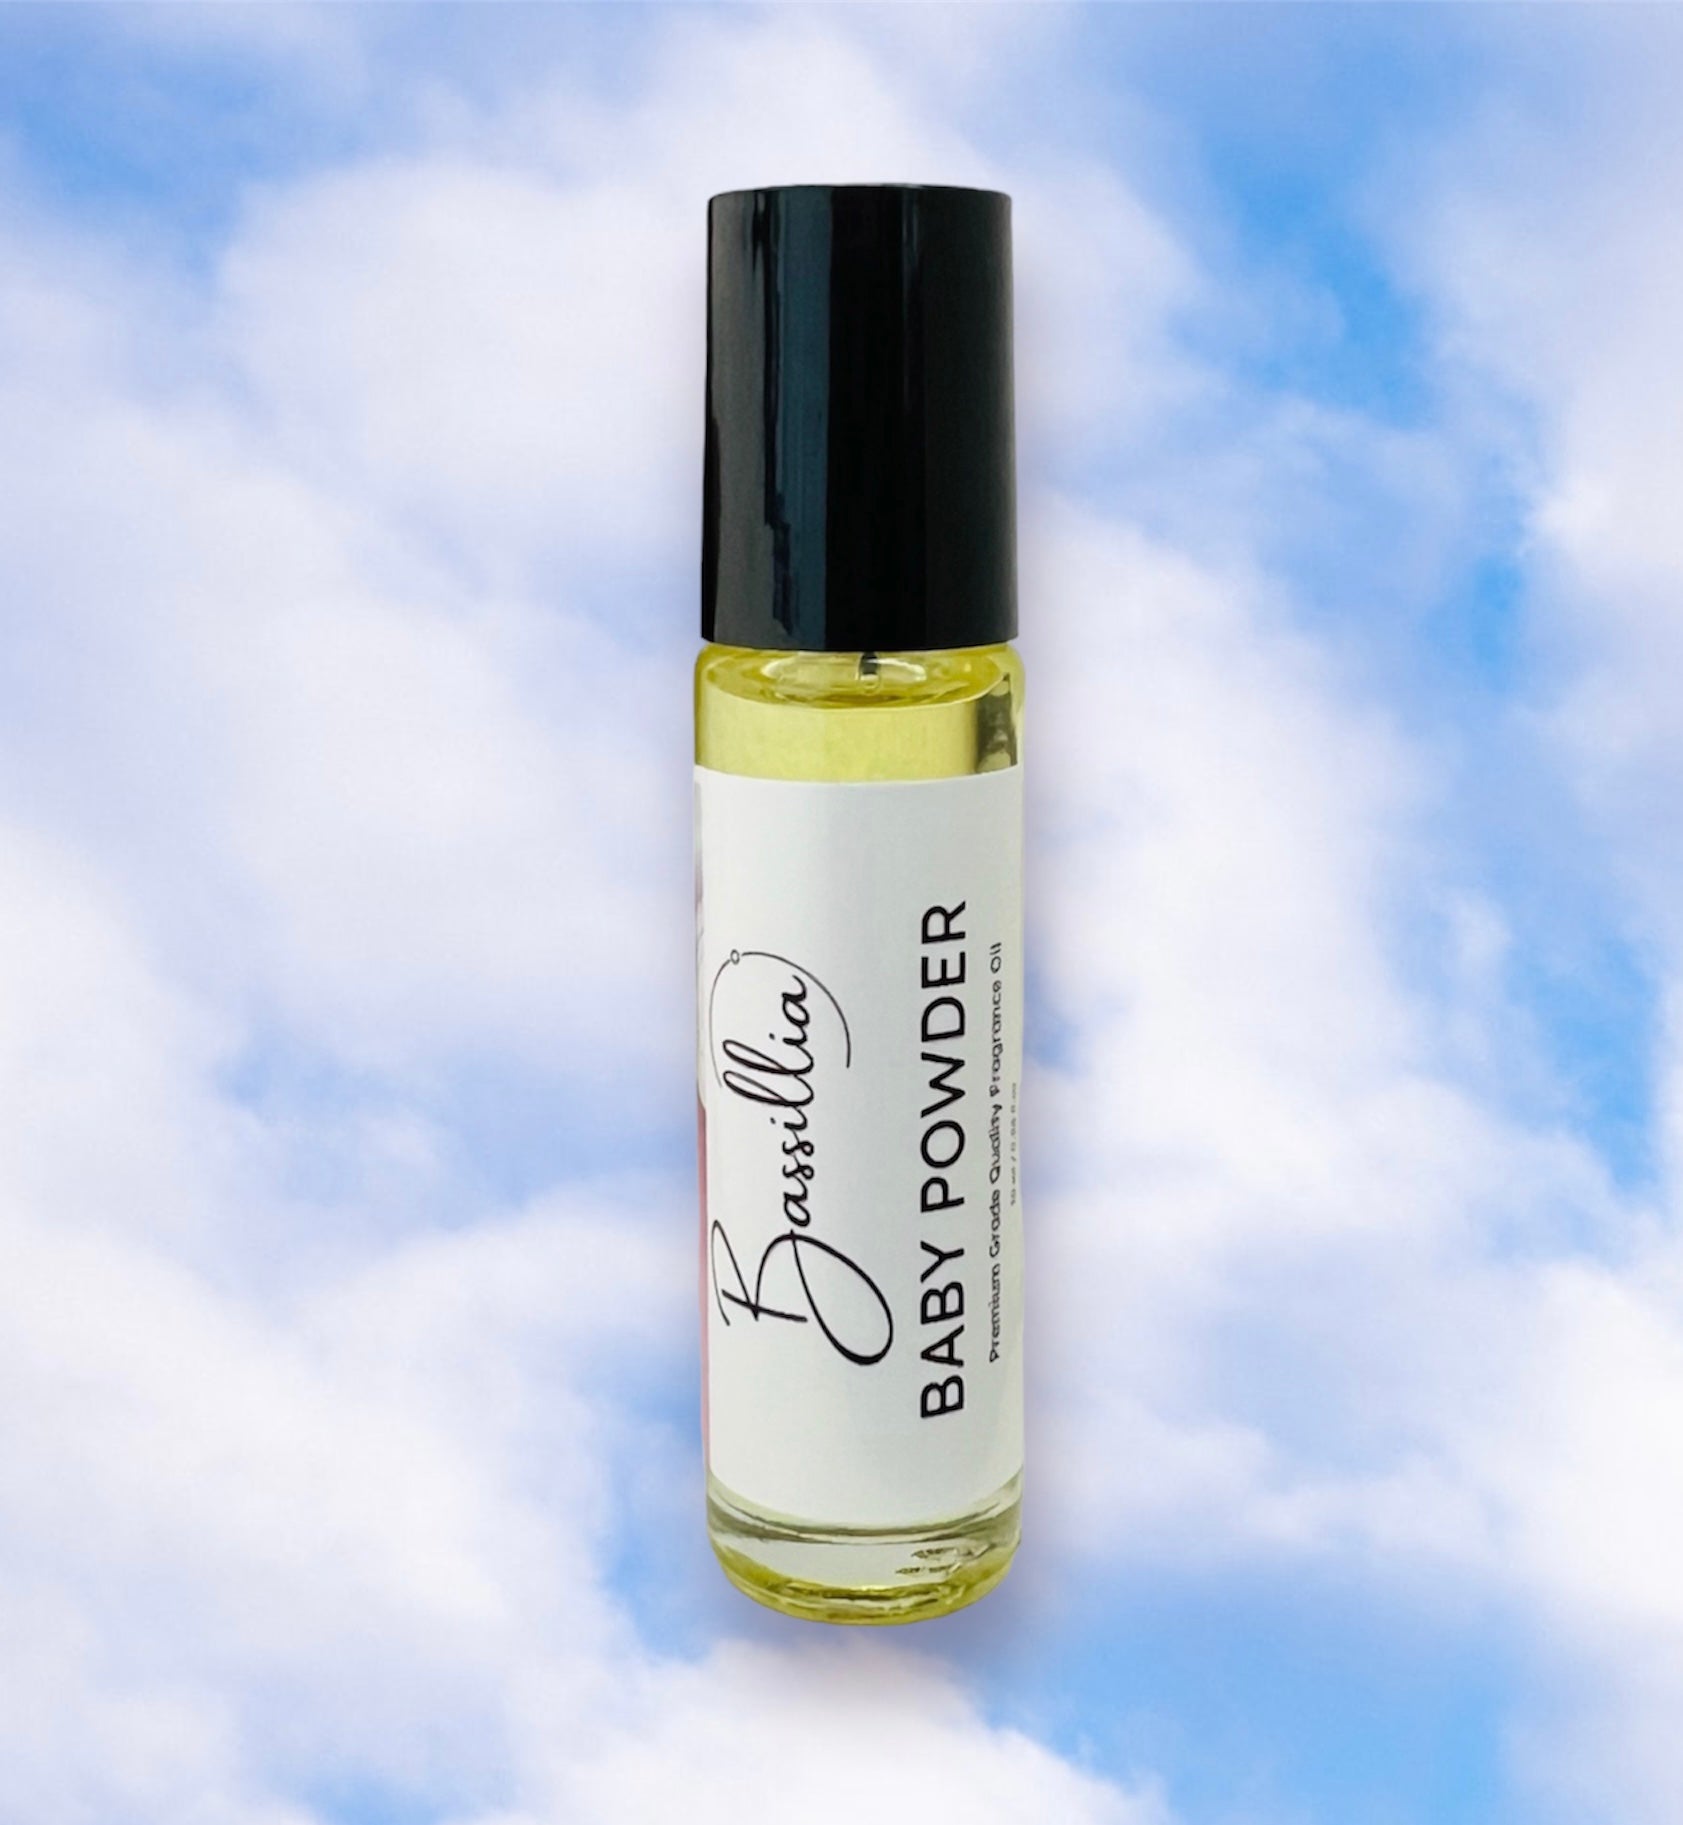 Bargz Baby Powder Perfume Fragrance Oil - 1 oz | Baby Scented Body Oil for  Men and Women Premium Grade for Diffusers, Candle and Soap Making, DIY